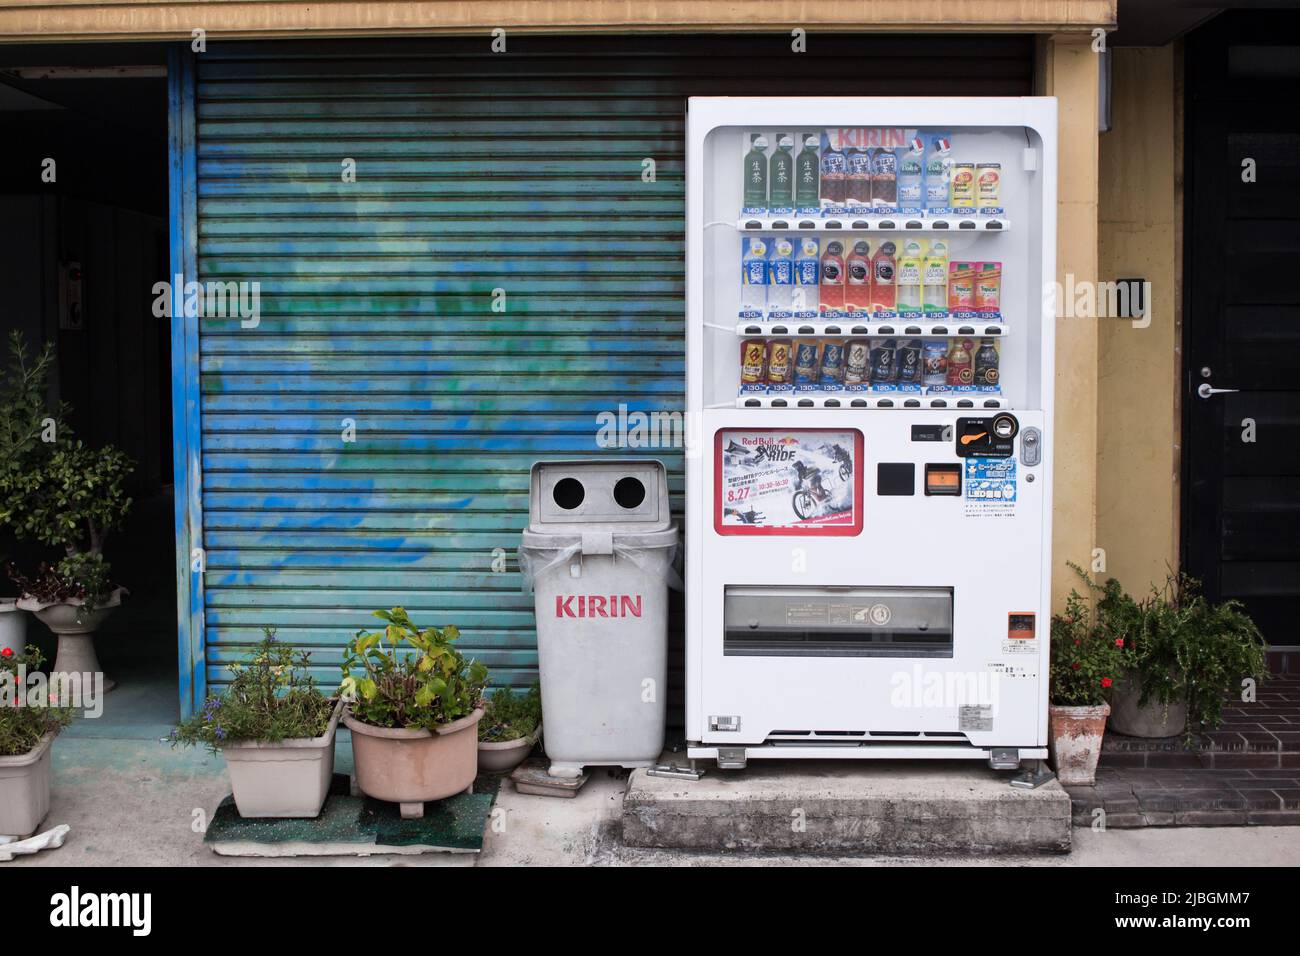 Hiroshima, Japan - Aug 8, 2017: The image of vending machine by Kirin (integrated Japanese beverages company) and bin. Stock Photo